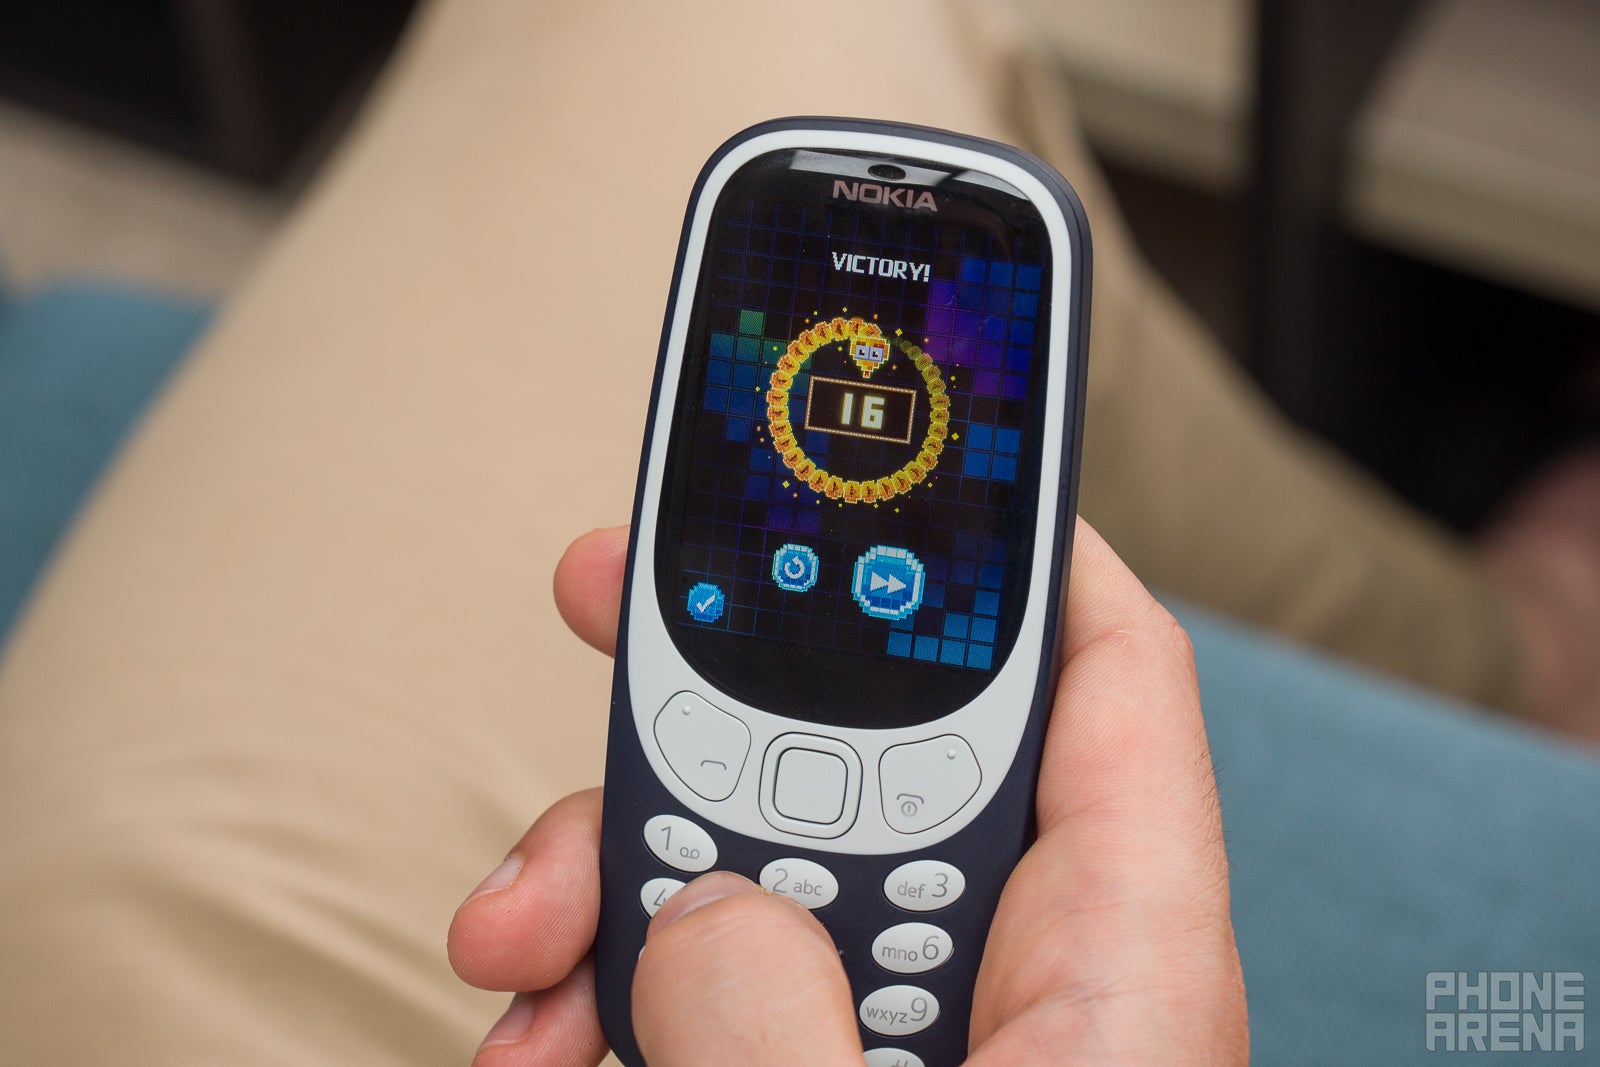 Nokia 3310 review: This retro smartphone could be a summer life-saver